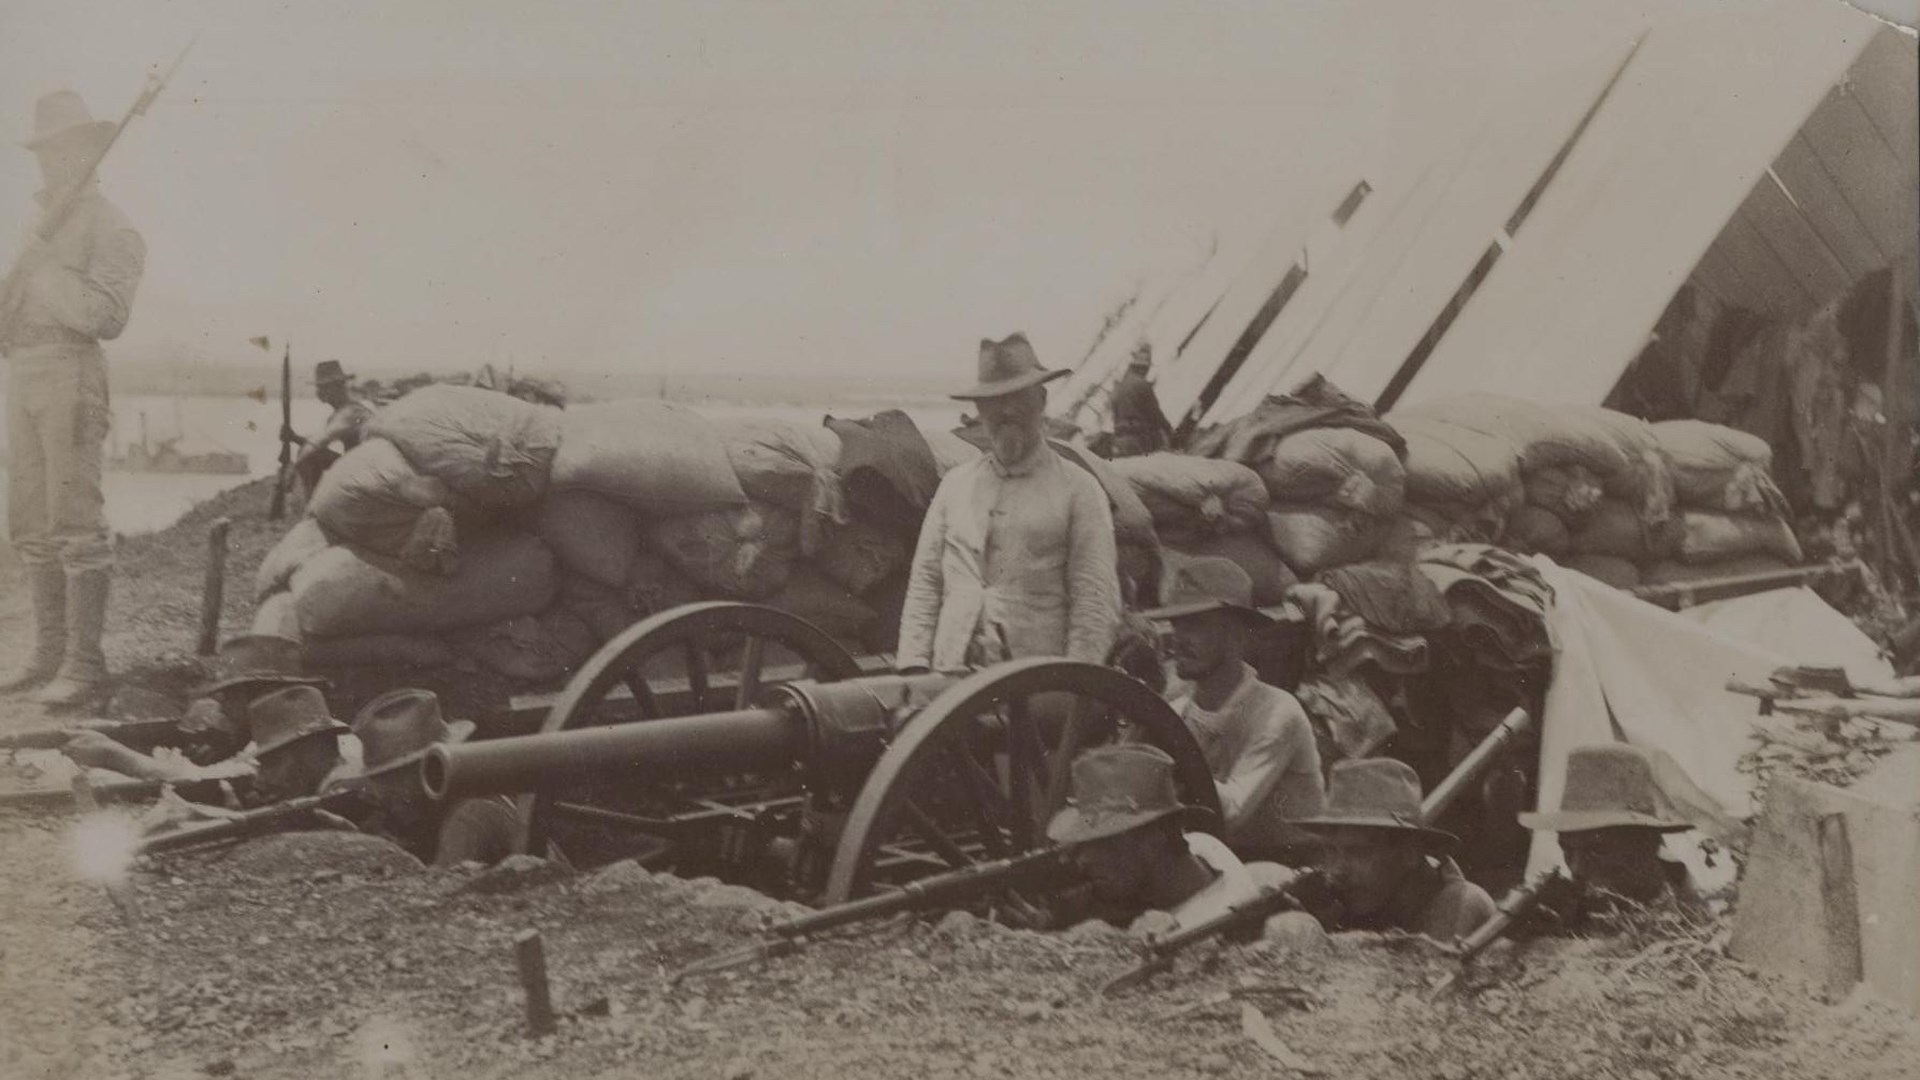 Company F in bunker with sandbags tent behind hotchkiss machine gun on wheels soldier guarding with rifles